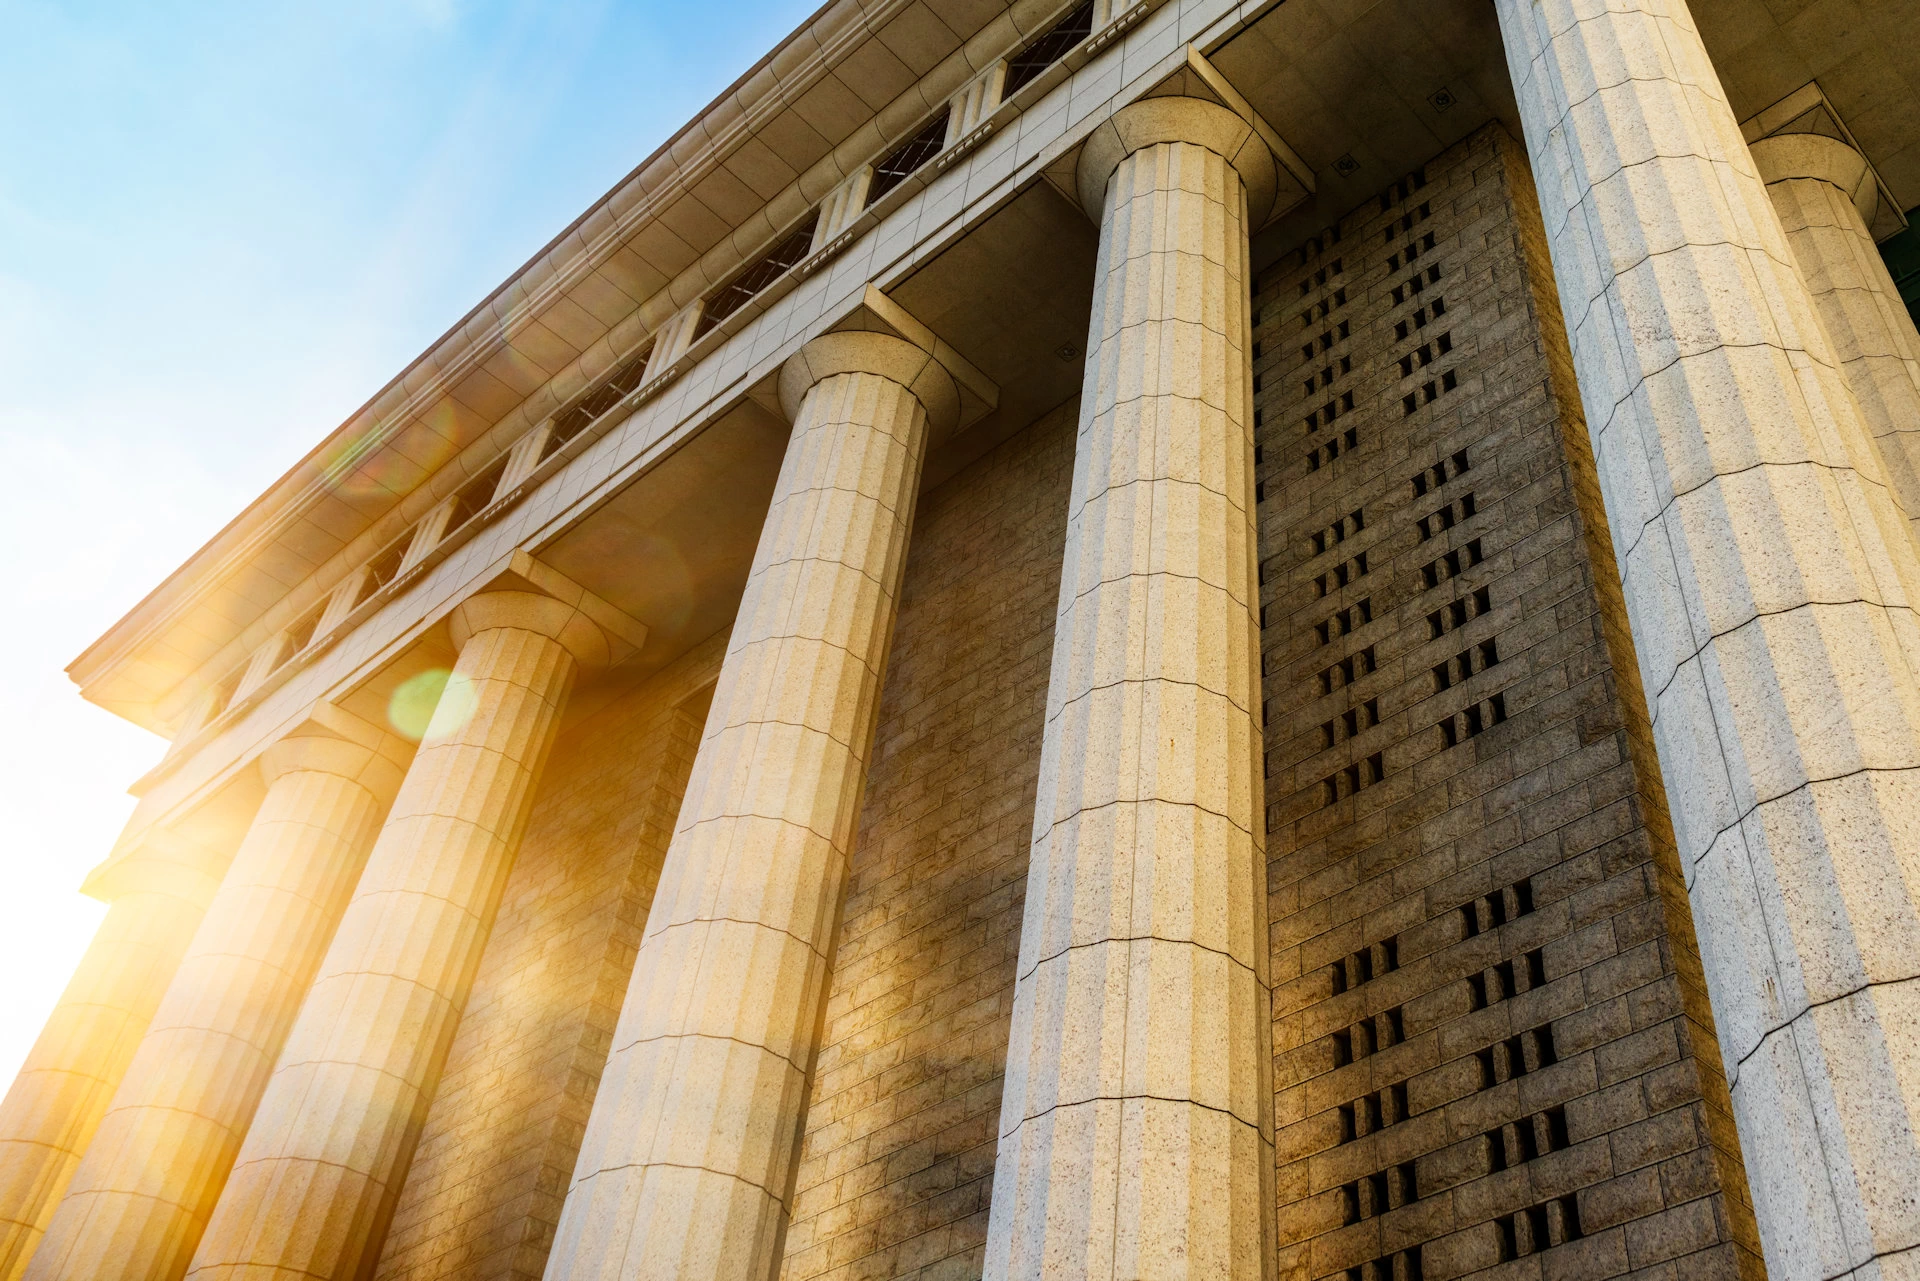 Top portion of a courthouse with Corinthian columns. With the title Contact Us written on top.